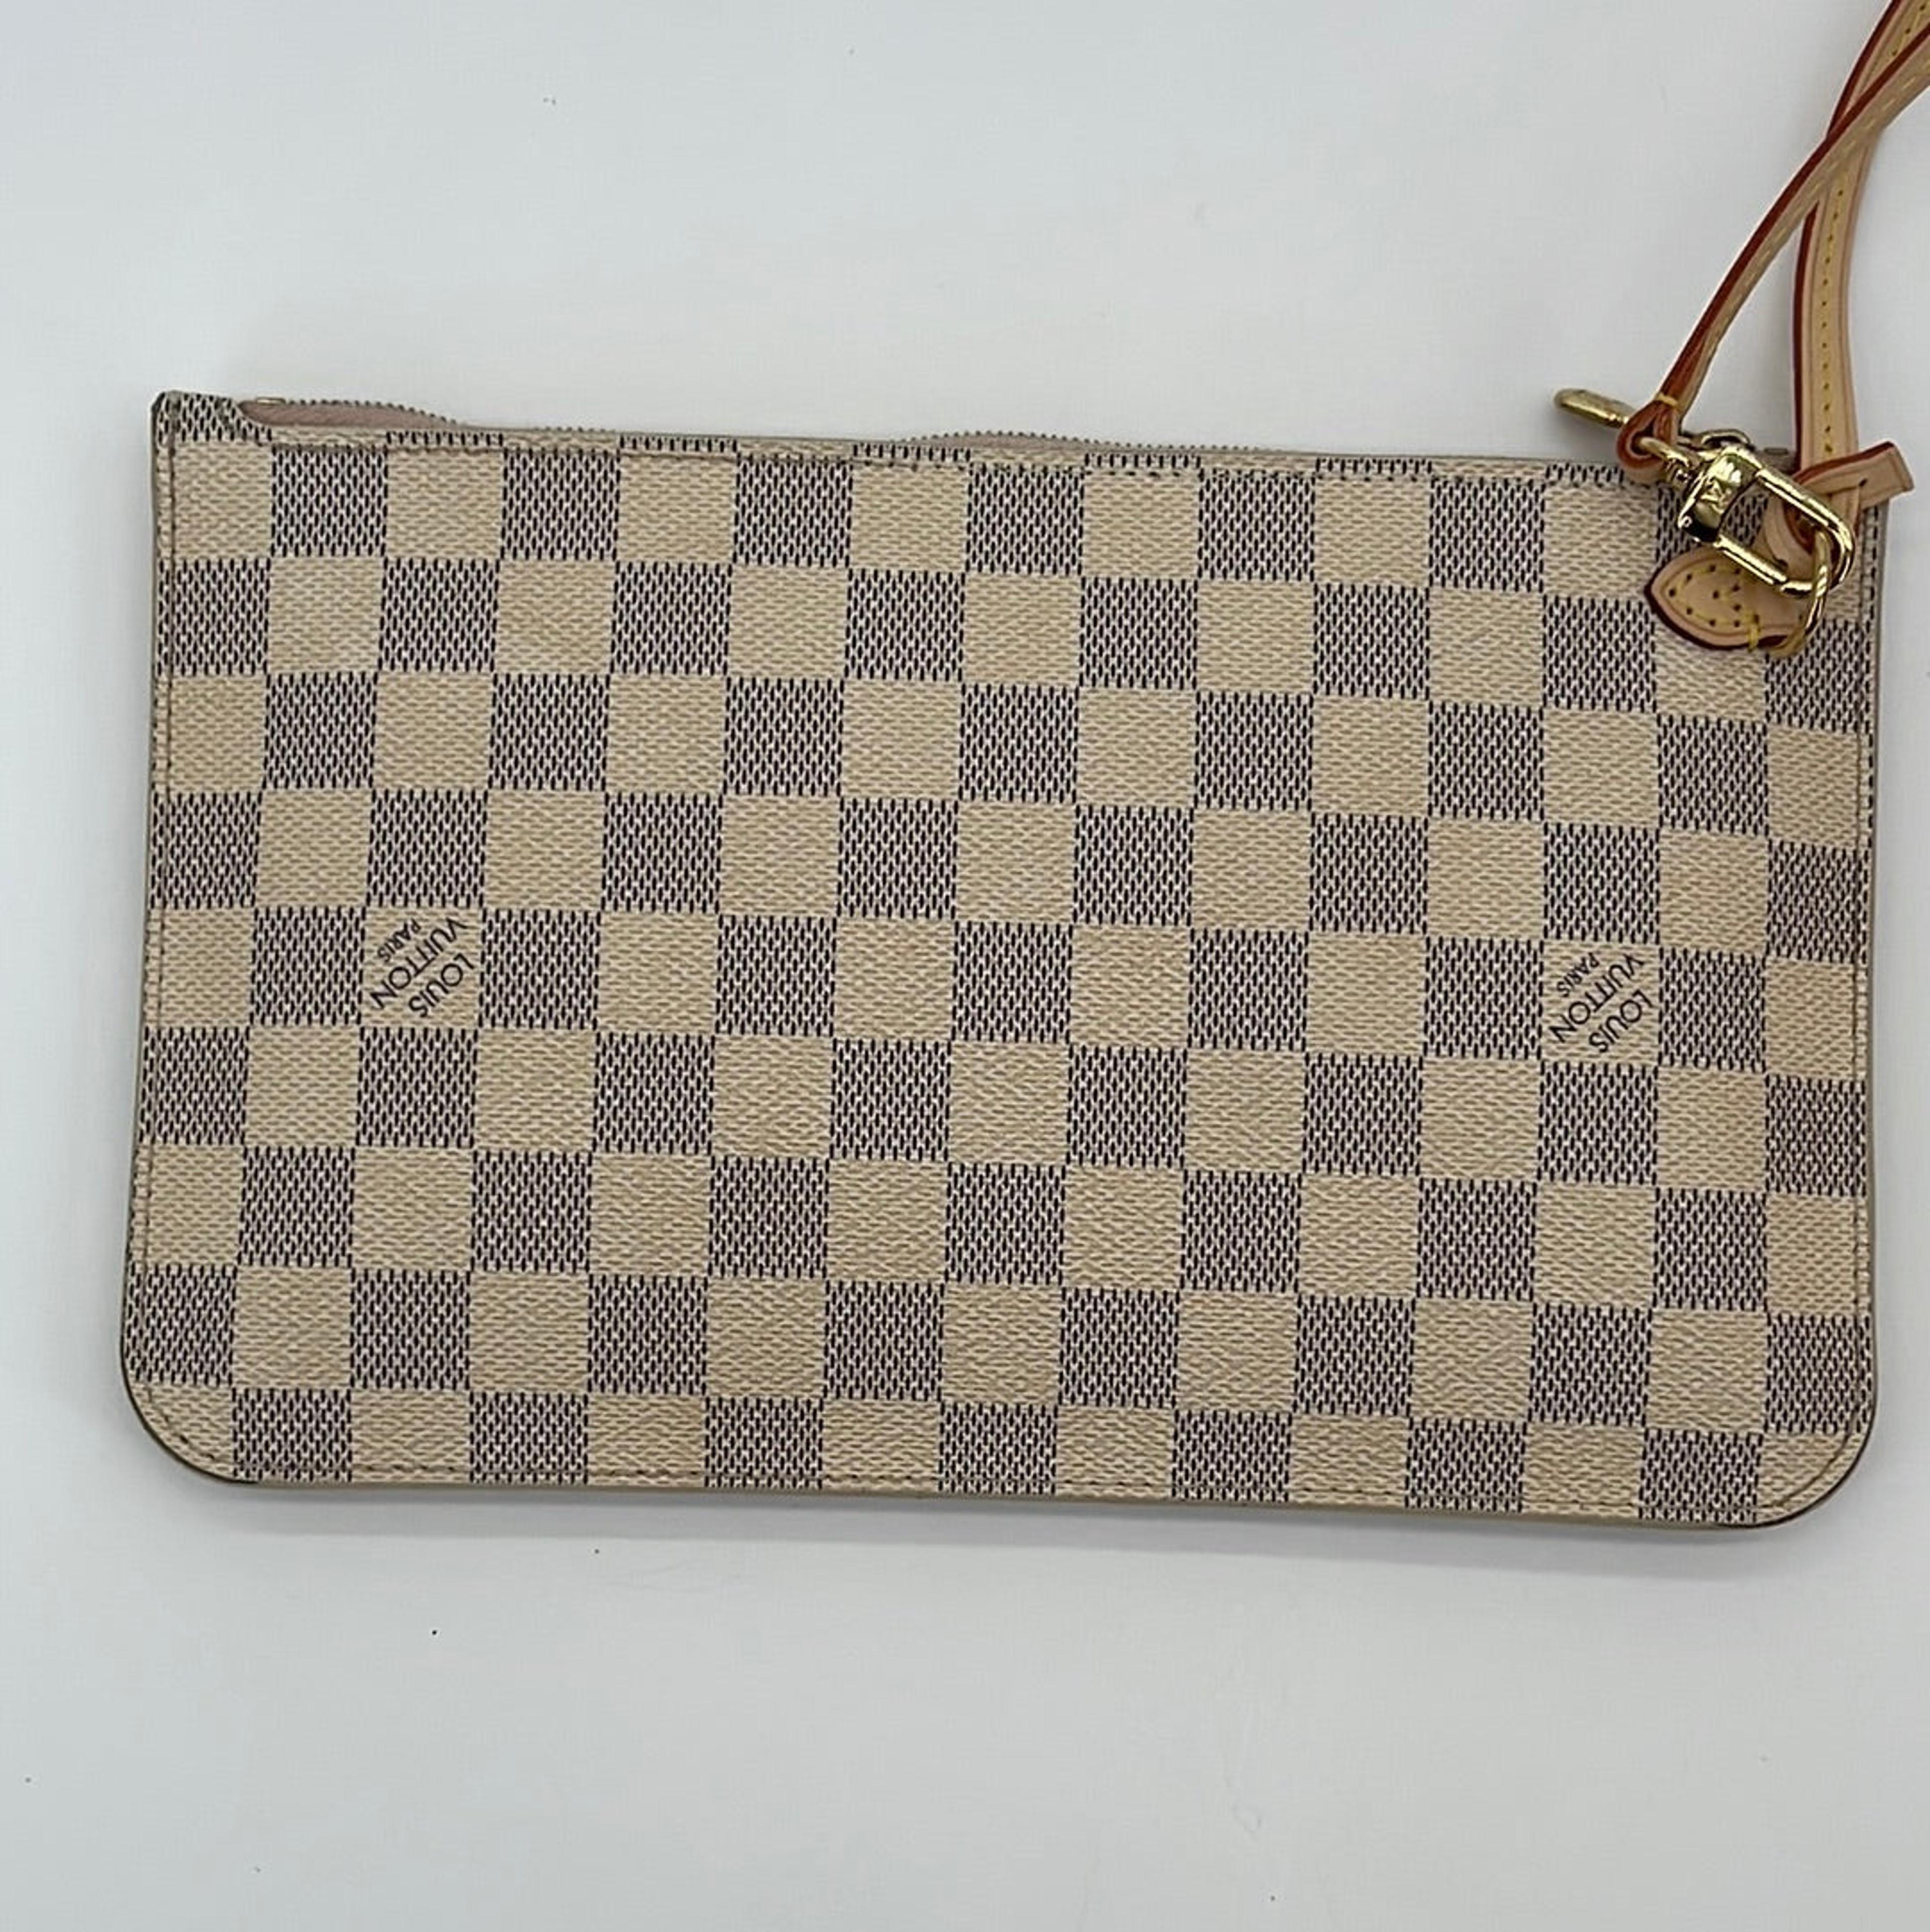 NTWRK - Preloved Louis Vuitton Damier Azur Neverfull Large Pouch SD2107